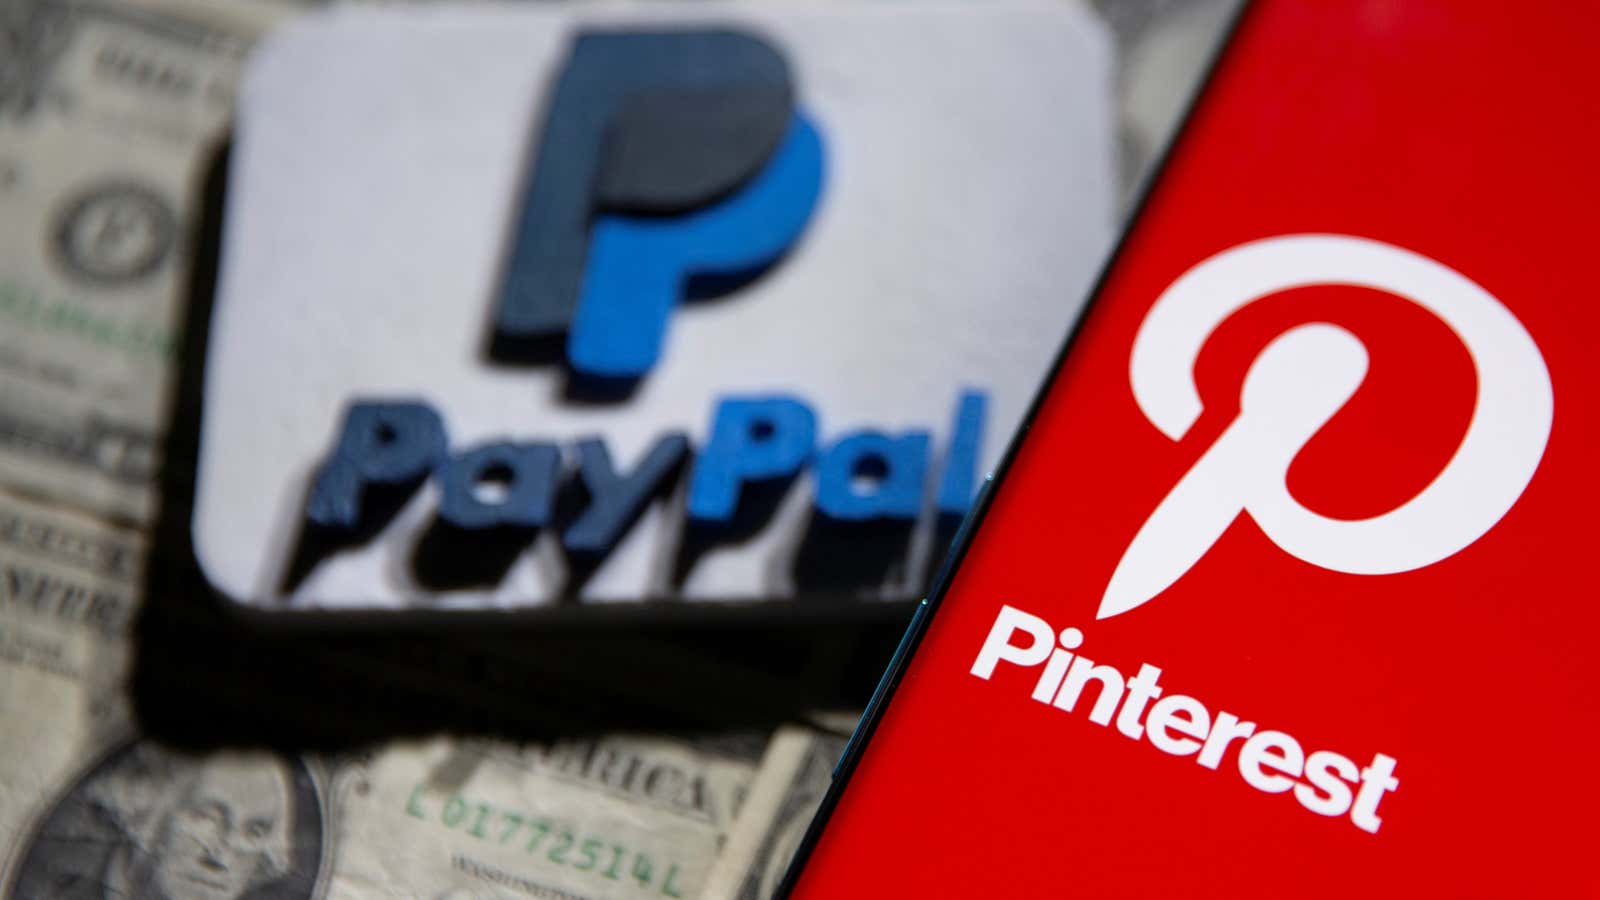 PayPal and Pinterest could build the digital shopping mall.